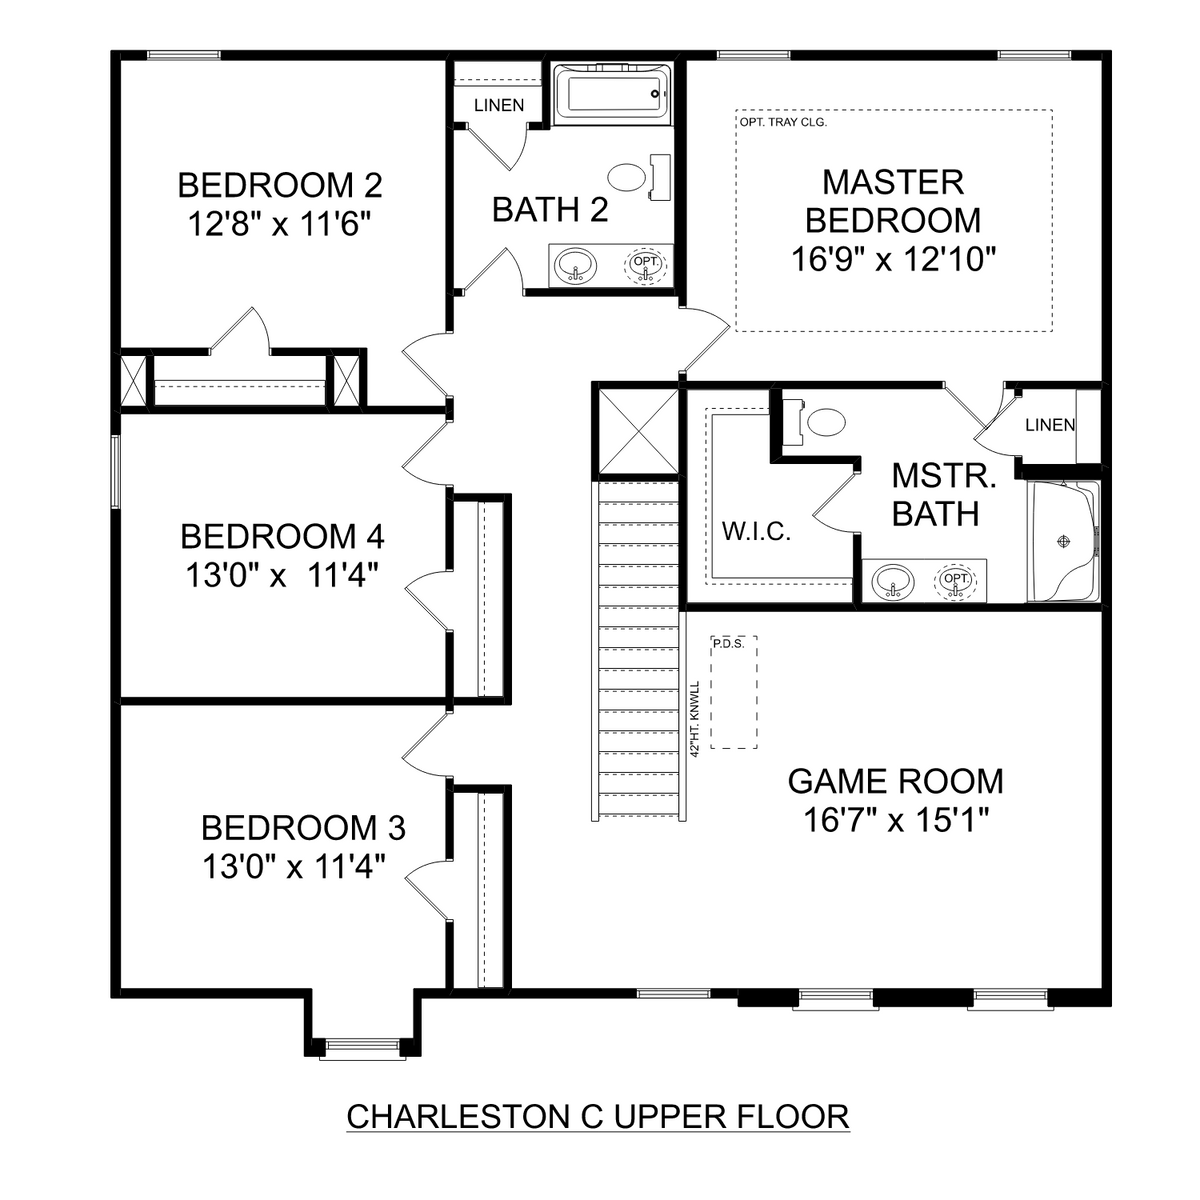 2 - The Charleston C floor plan layout for 118 Fall Meadow Drive in Davidson Homes' Durham Farms community.